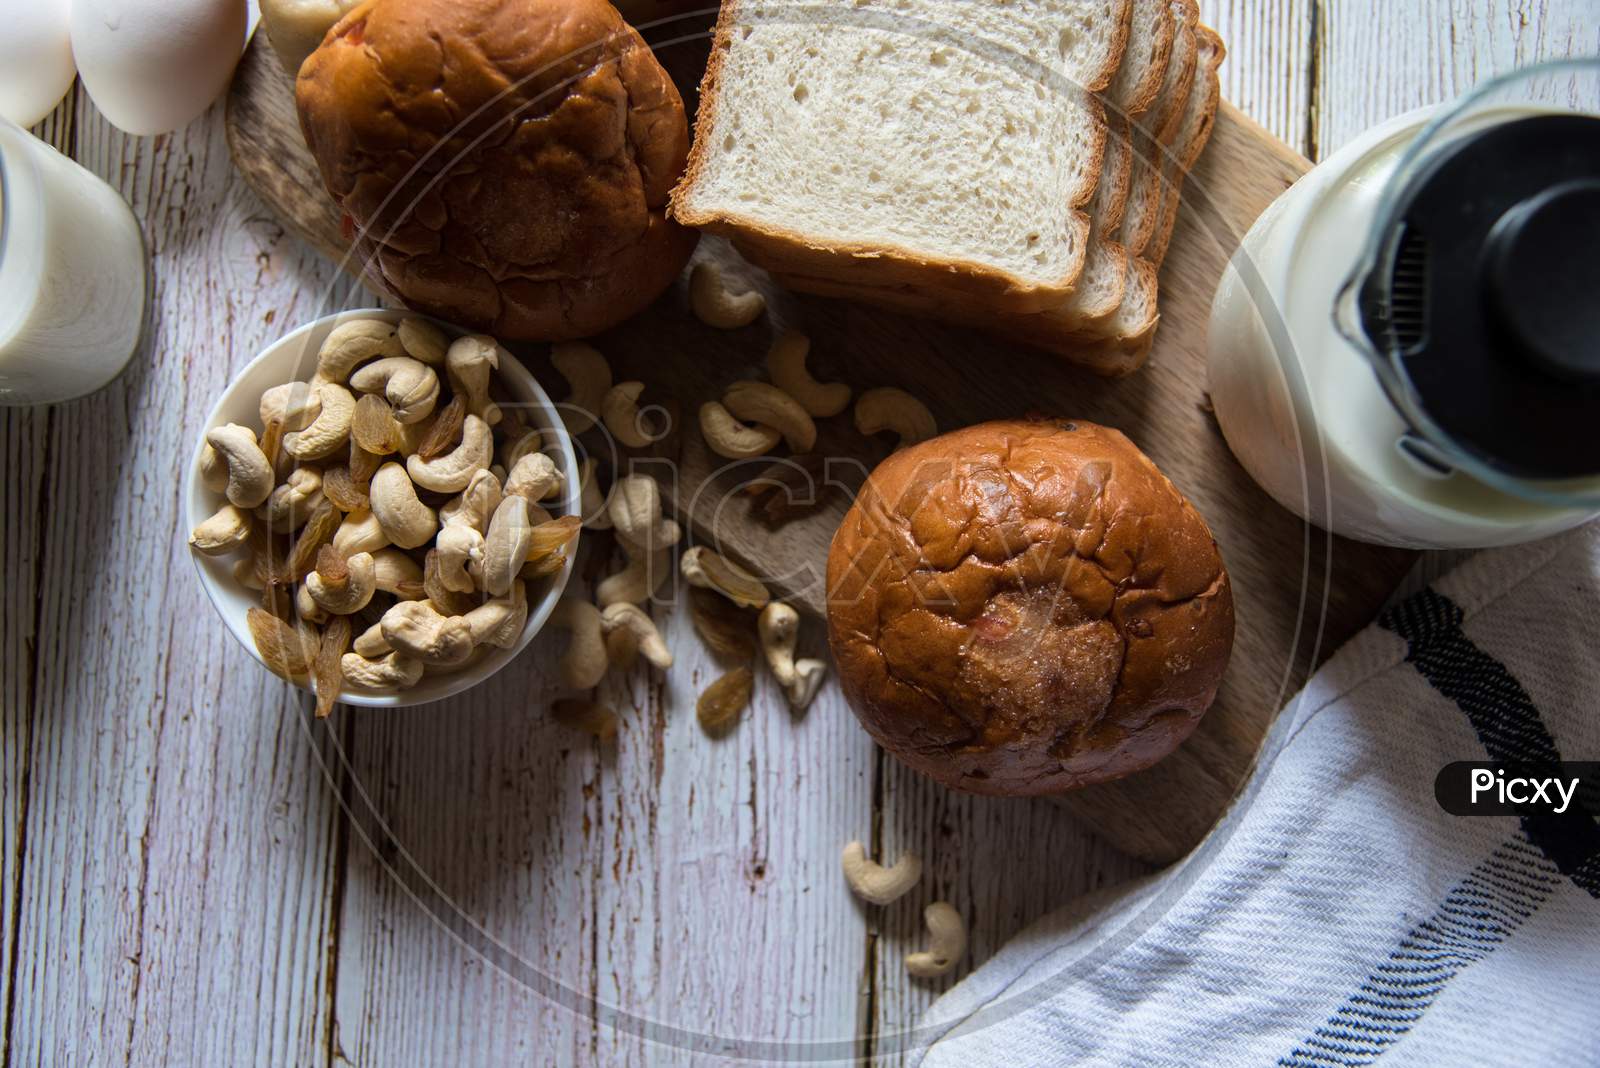 Breads, nuts and other healthy food ingredients necessary for healthy lifestyle